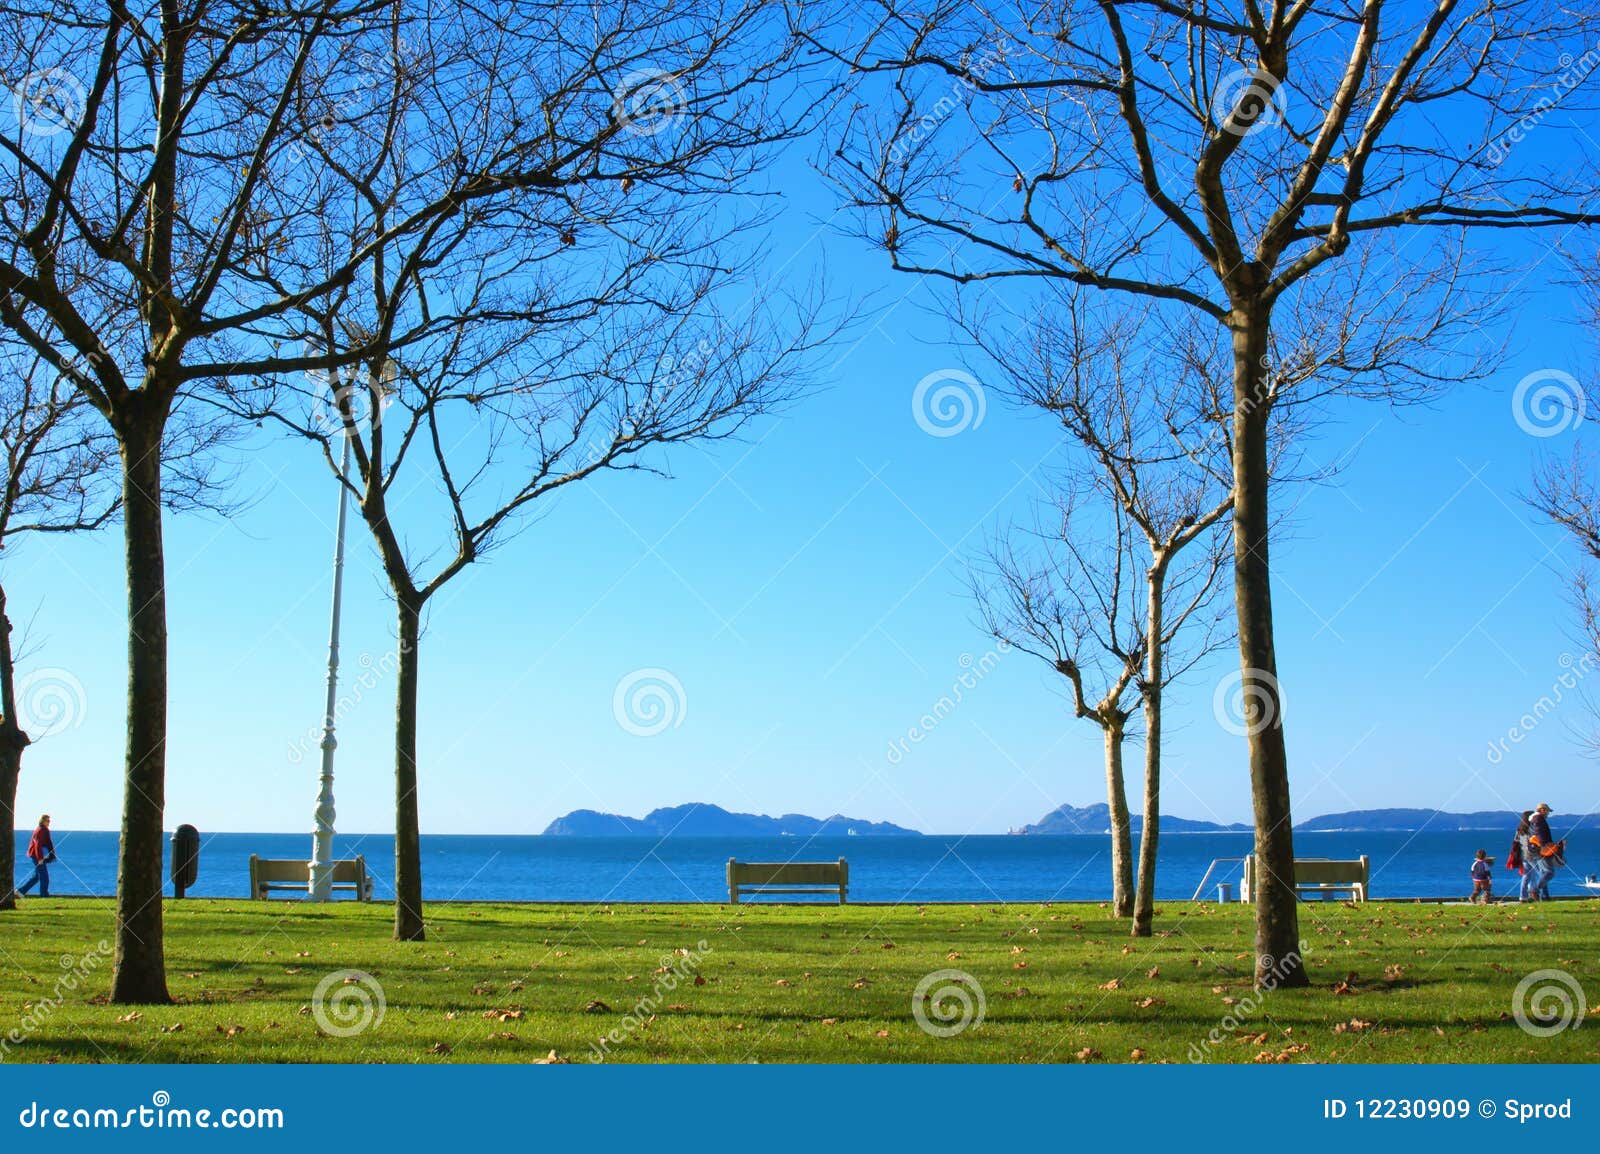 Autumn in the beach stock image. Image of atmosphere - 12230909